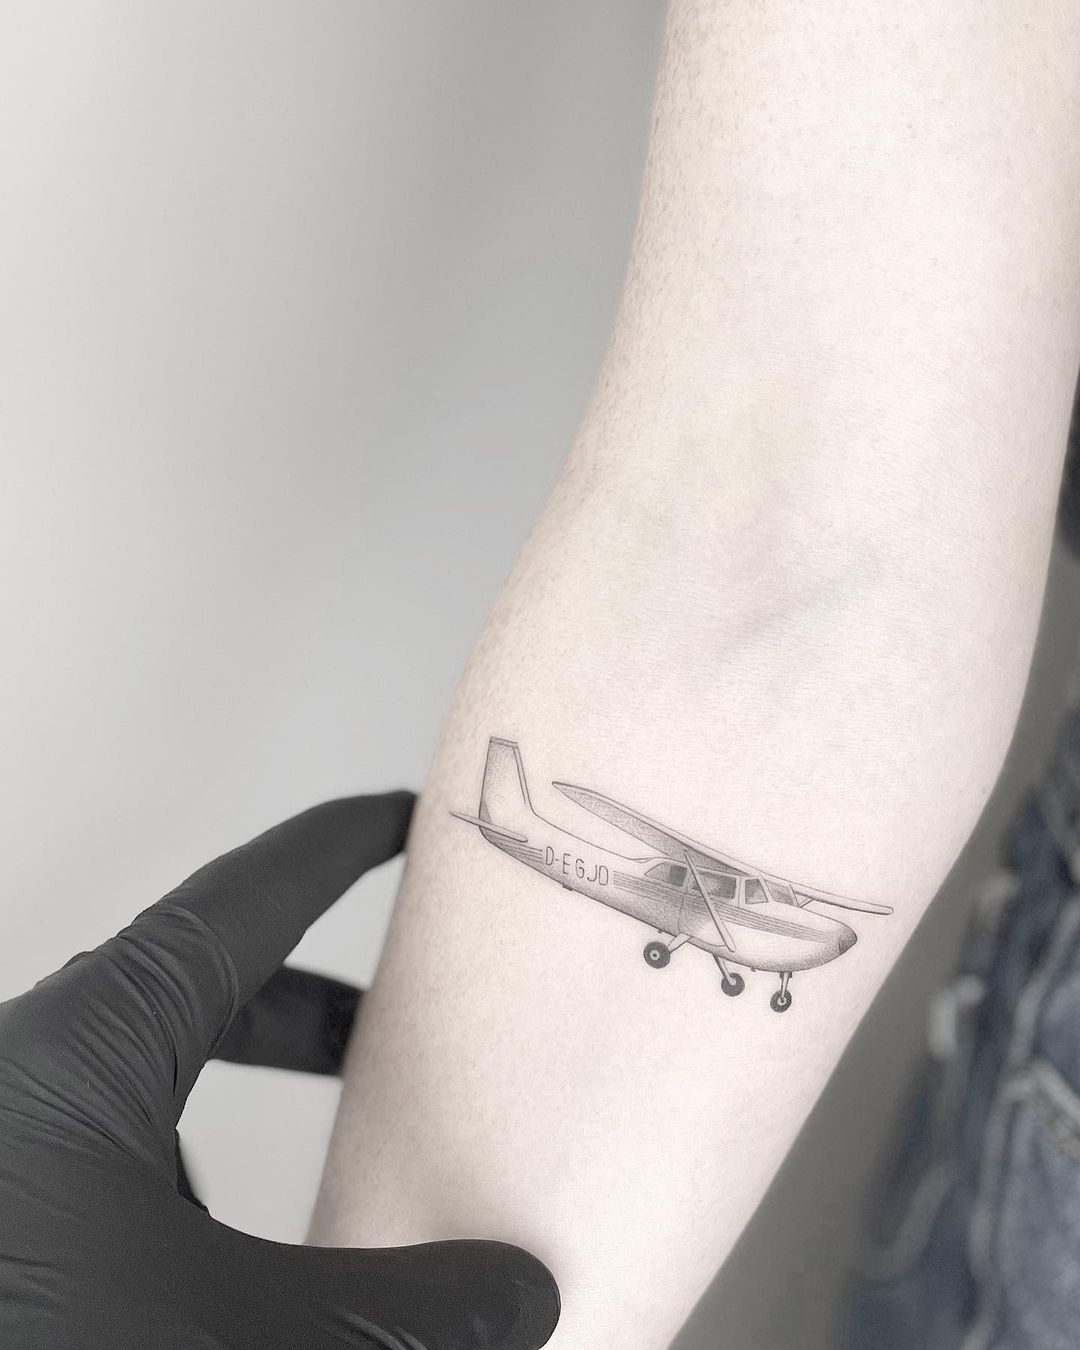 A minimal tatoo shows an airplane flying out of a suitcase to travel tattoo  idea | TattoosAI